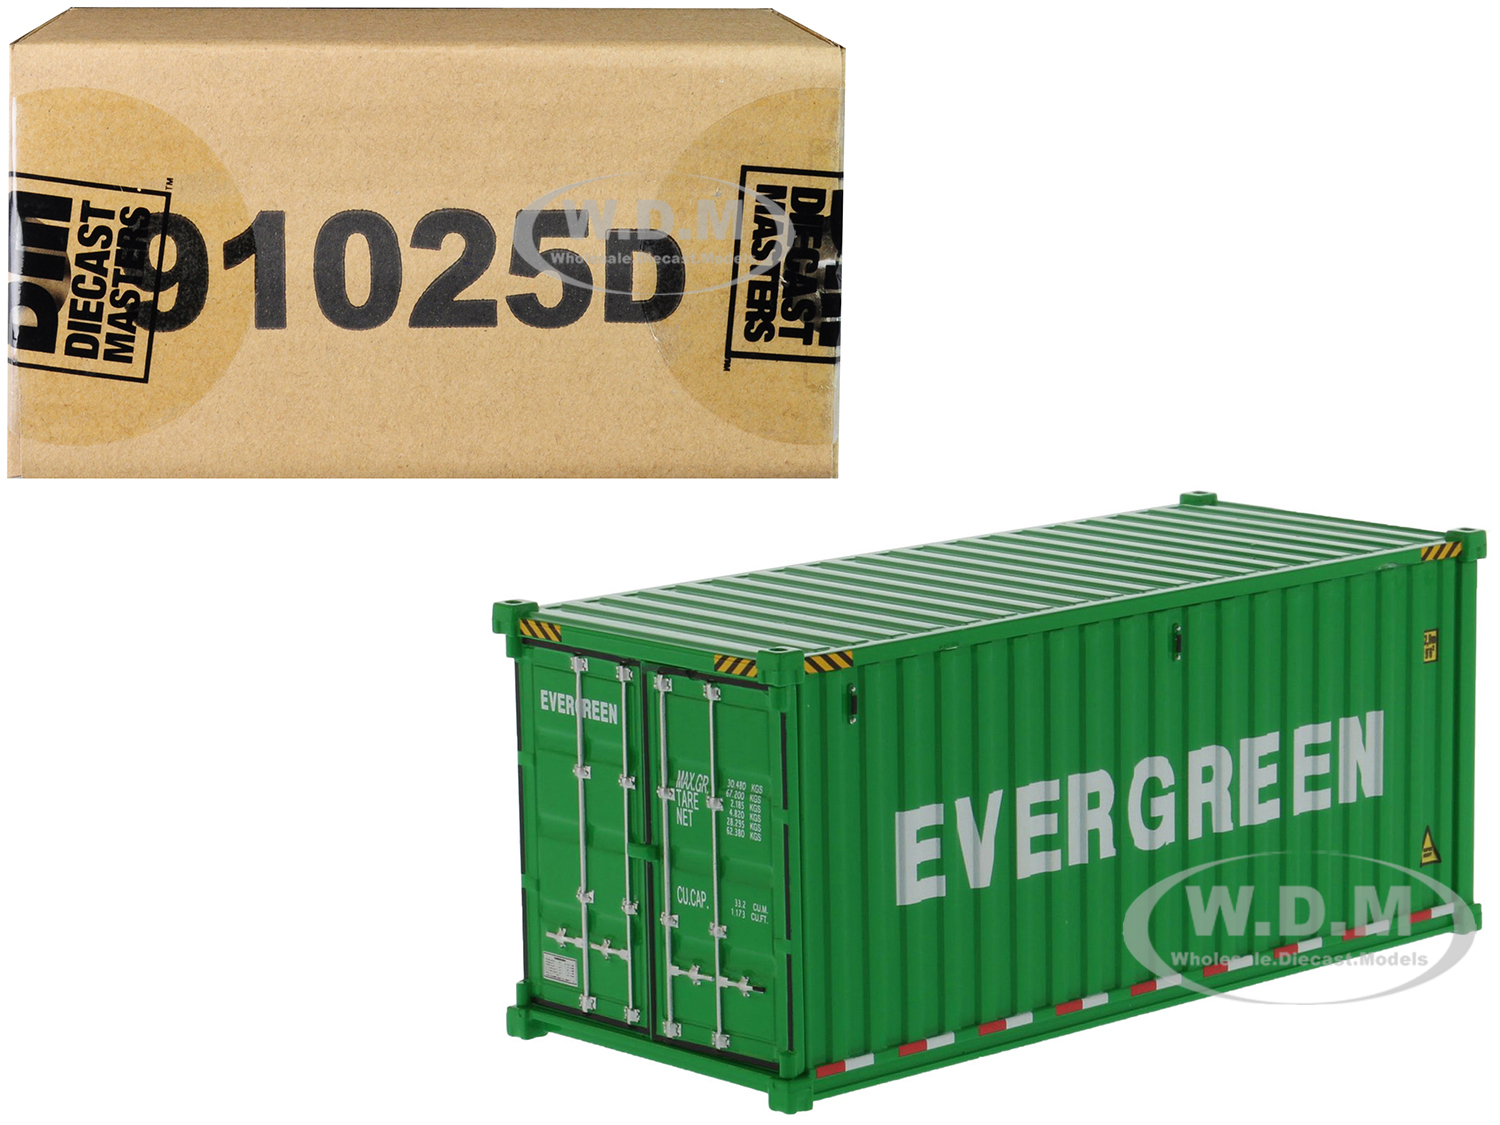 20 Dry Goods Sea Container "EverGreen" Green "Transport Series" 1/50 Model by Diecast Masters